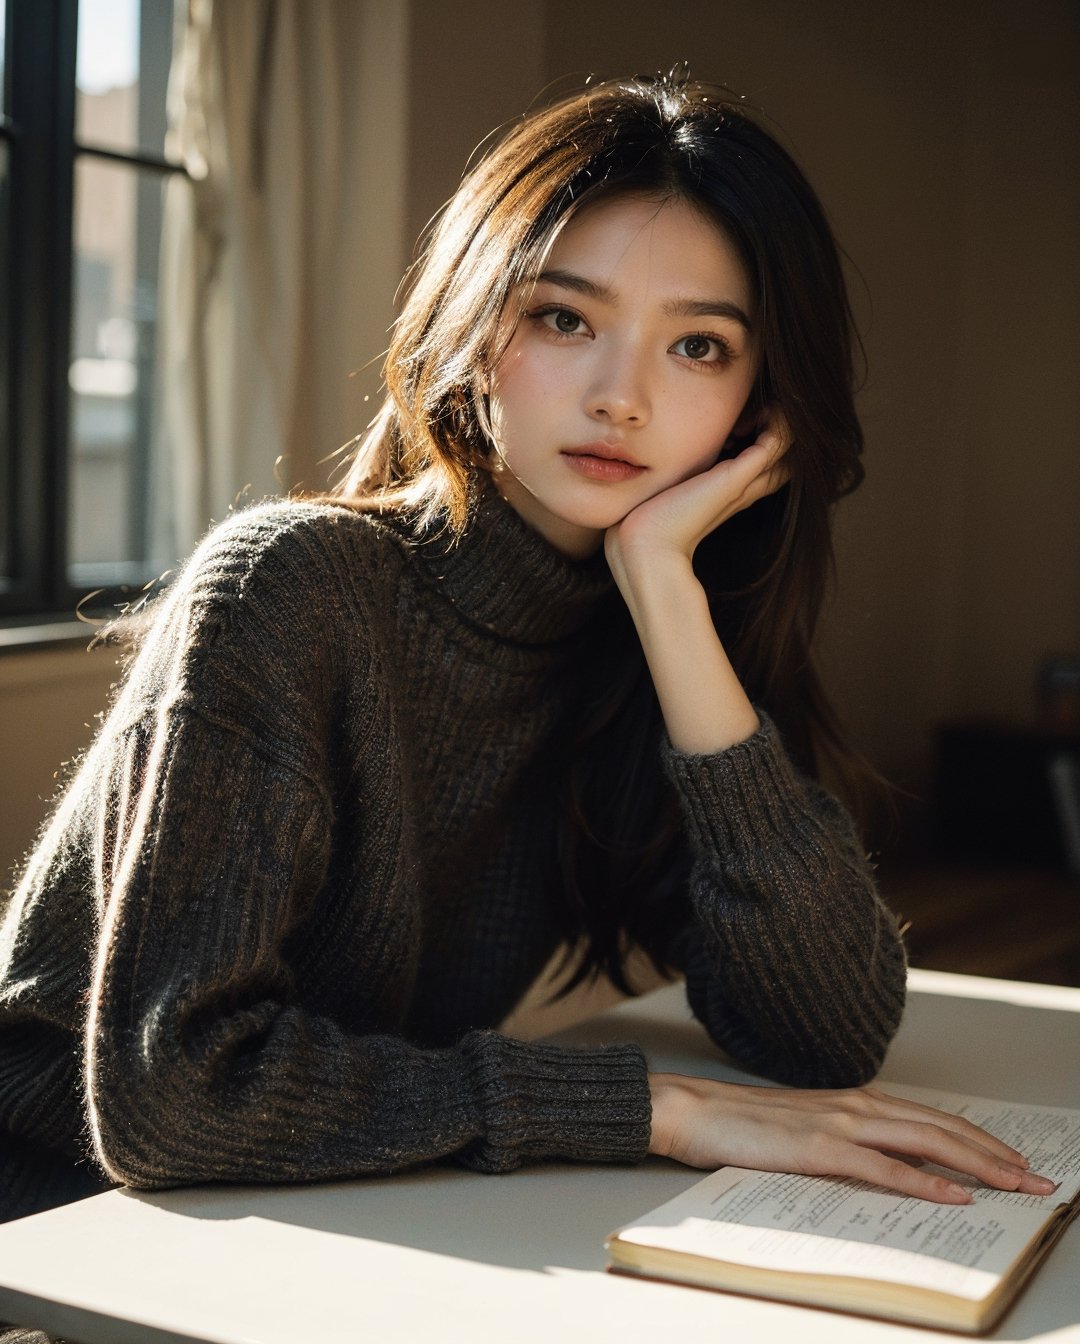 (RAW photo, best quality), (realistic, photo-Realistic), best quality, masterpiece, beautiful and aesthetic, 16K, (HDR), high contrast, (vibrant color),

ous hair,

sitting on a desk, looking to the side at the viewer, wearing a black knit sweater